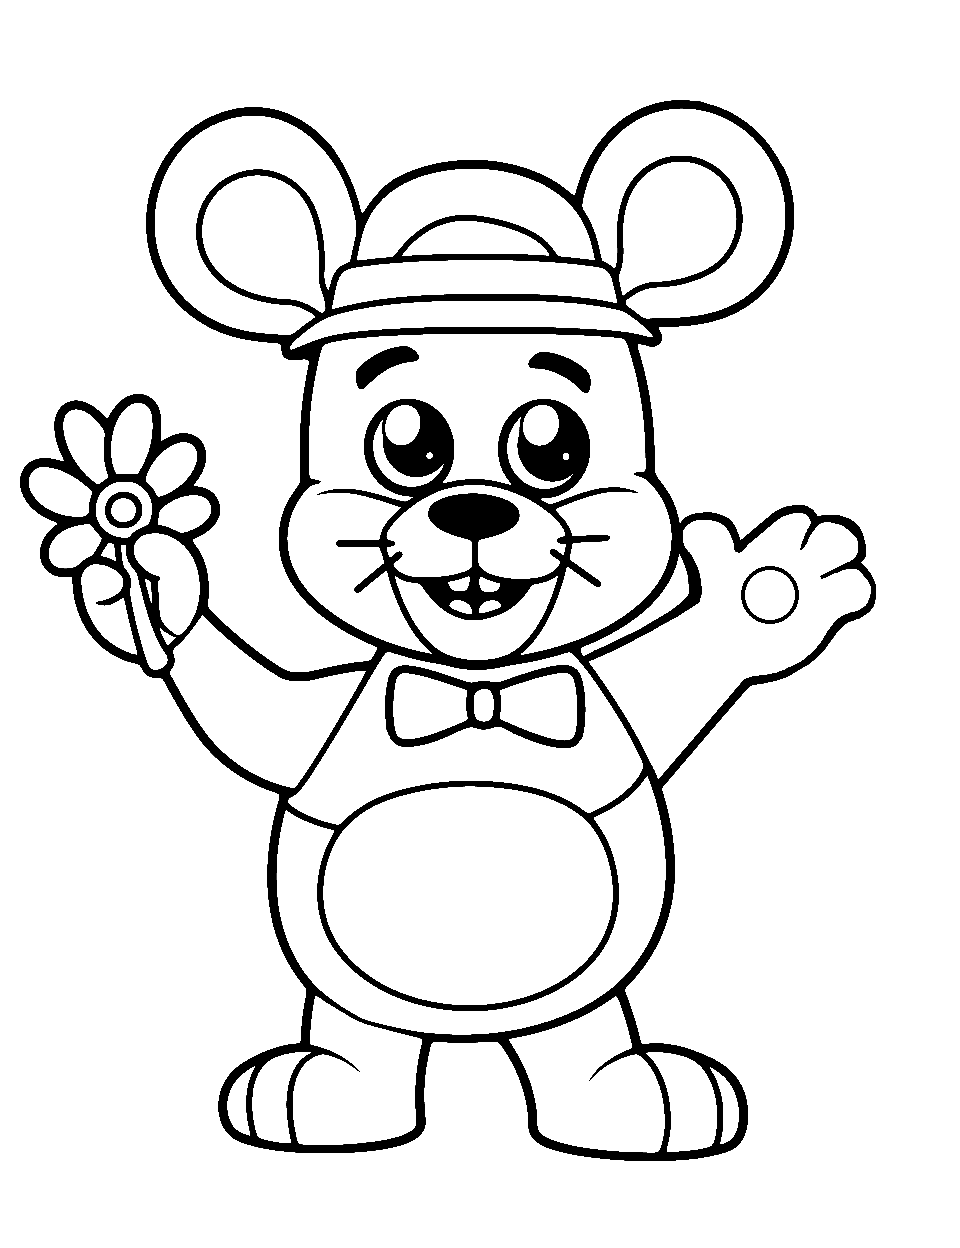 Waving Bonnie Five Nights at Freddys Coloring Page - Toy Bonnie waving cheerfully.